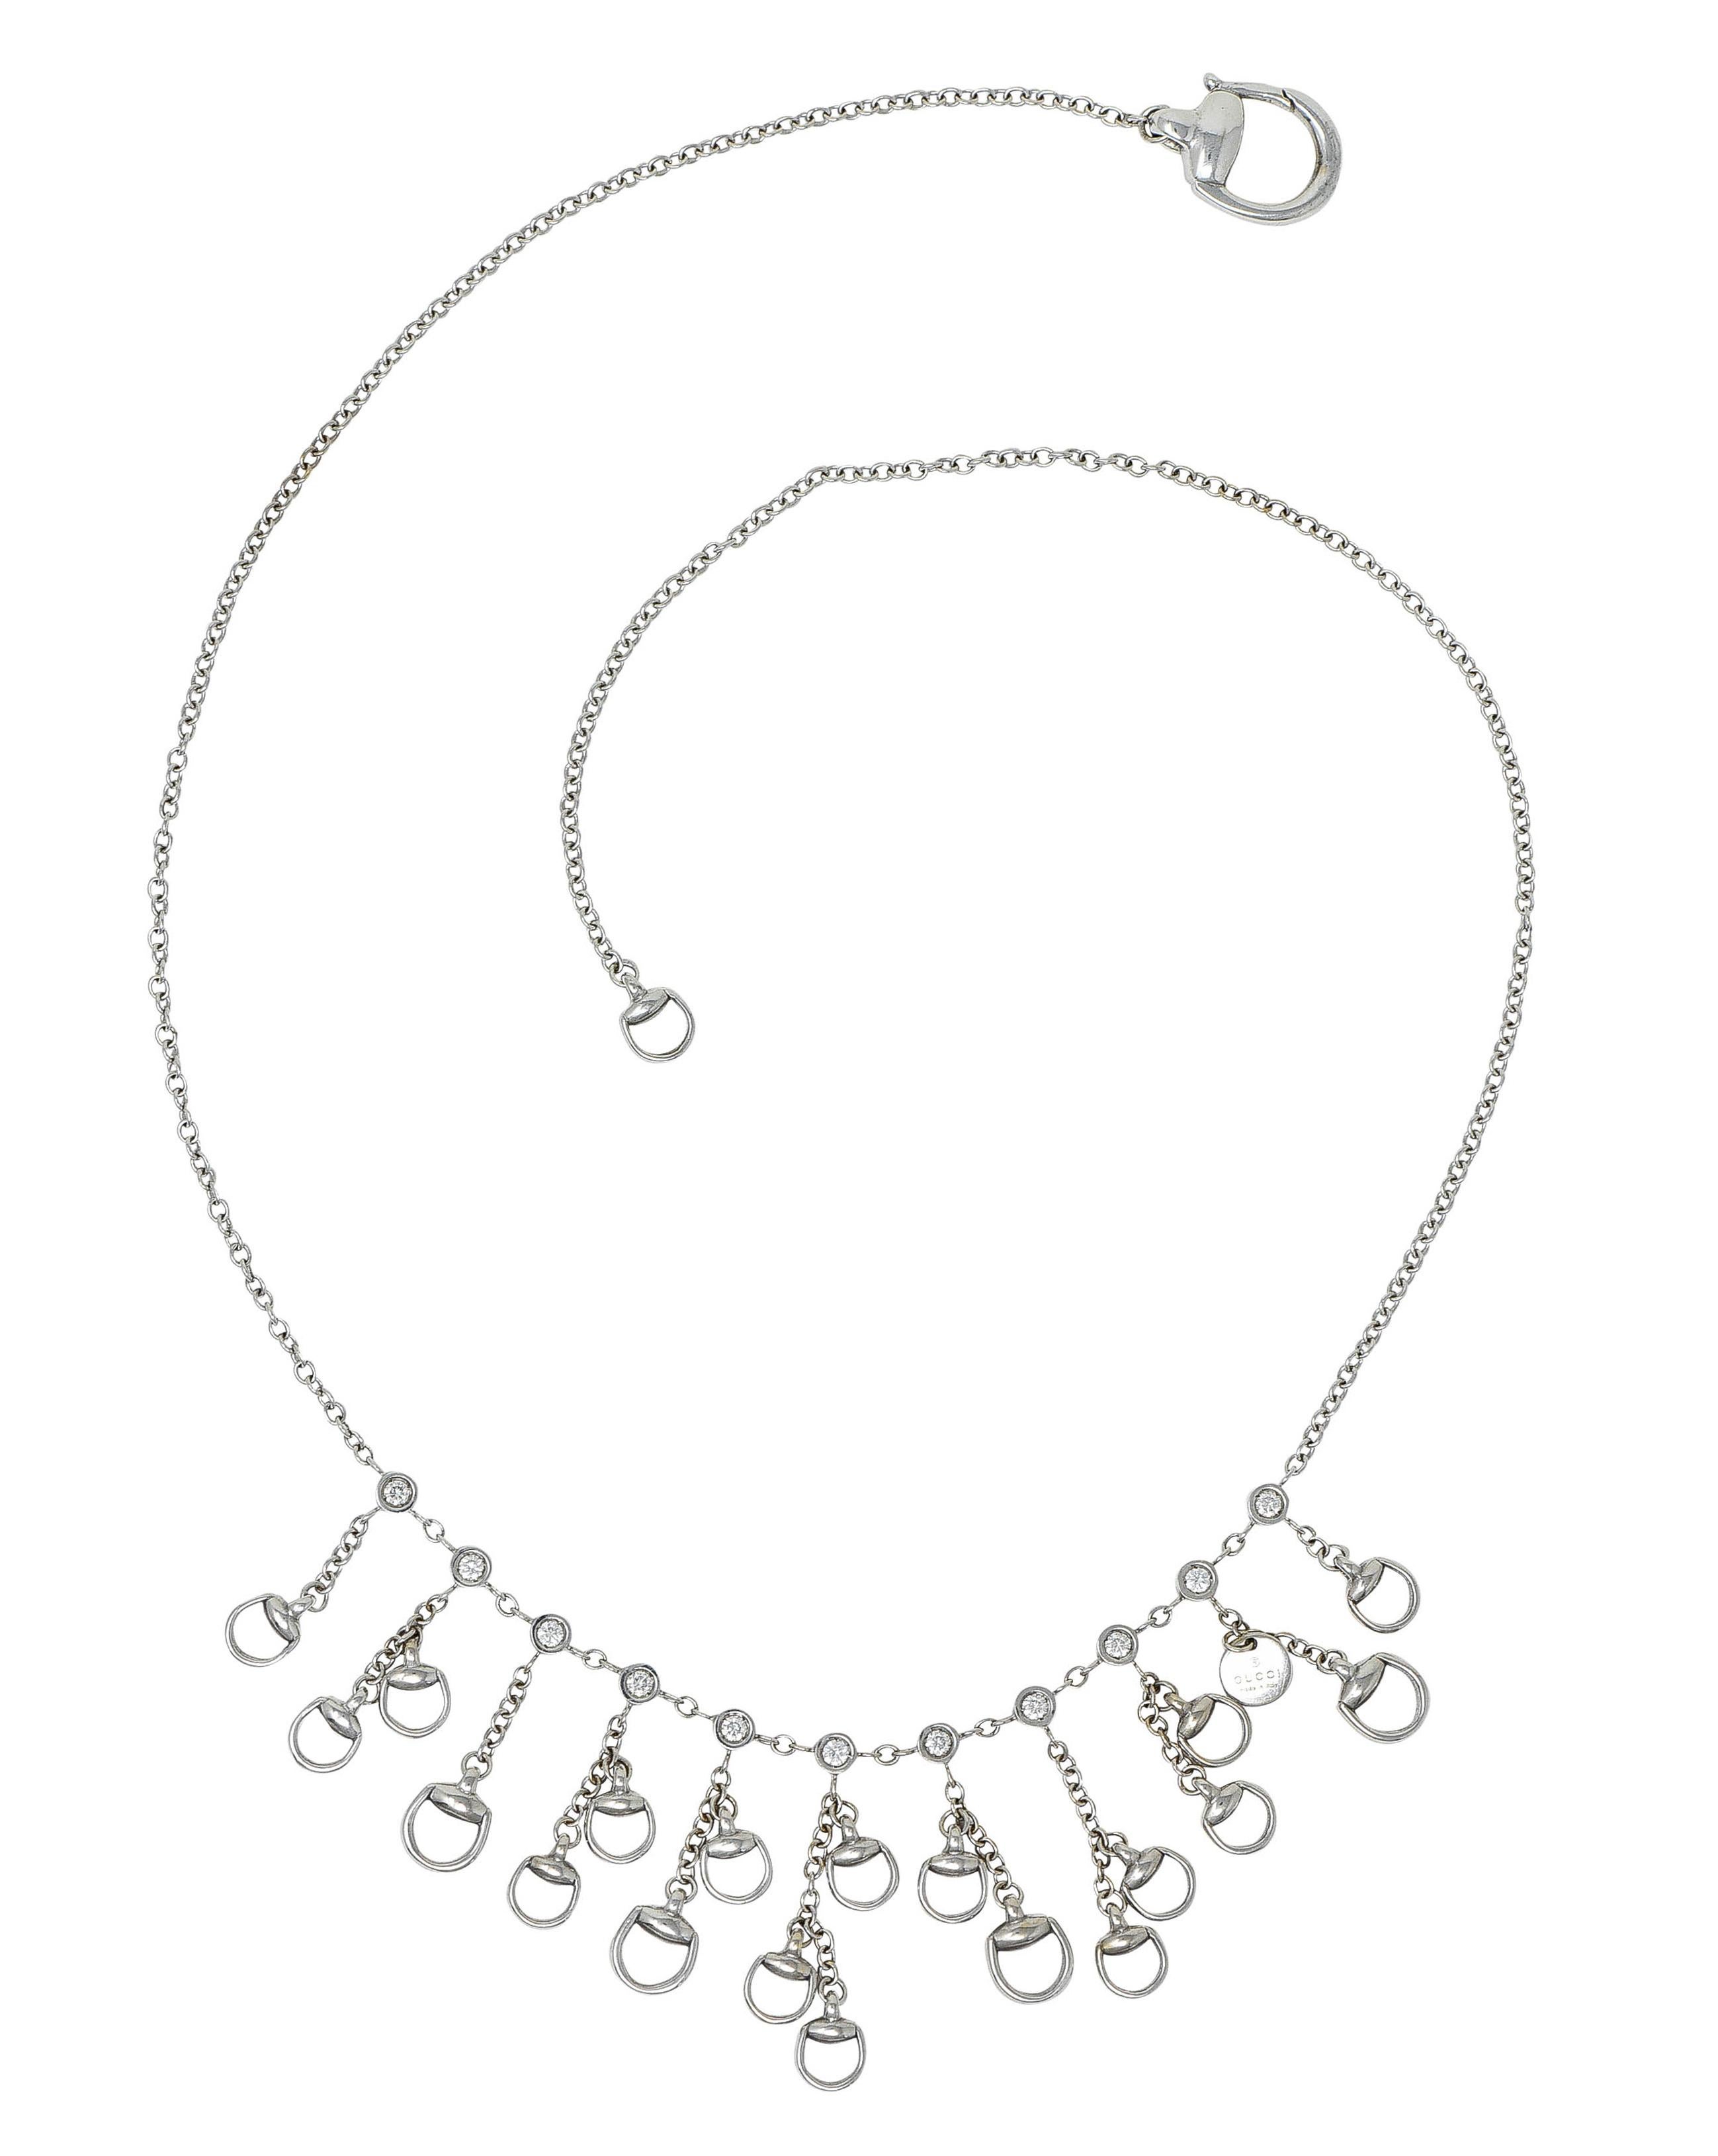 Classic cable chain necklace is bezel set to front by twelve round brilliant cut diamonds

Weighing in total approximately 0.50 carat with G/H color and SI clarity

Suspending articulated fringe drops featuring stylized horsebit motifs and a